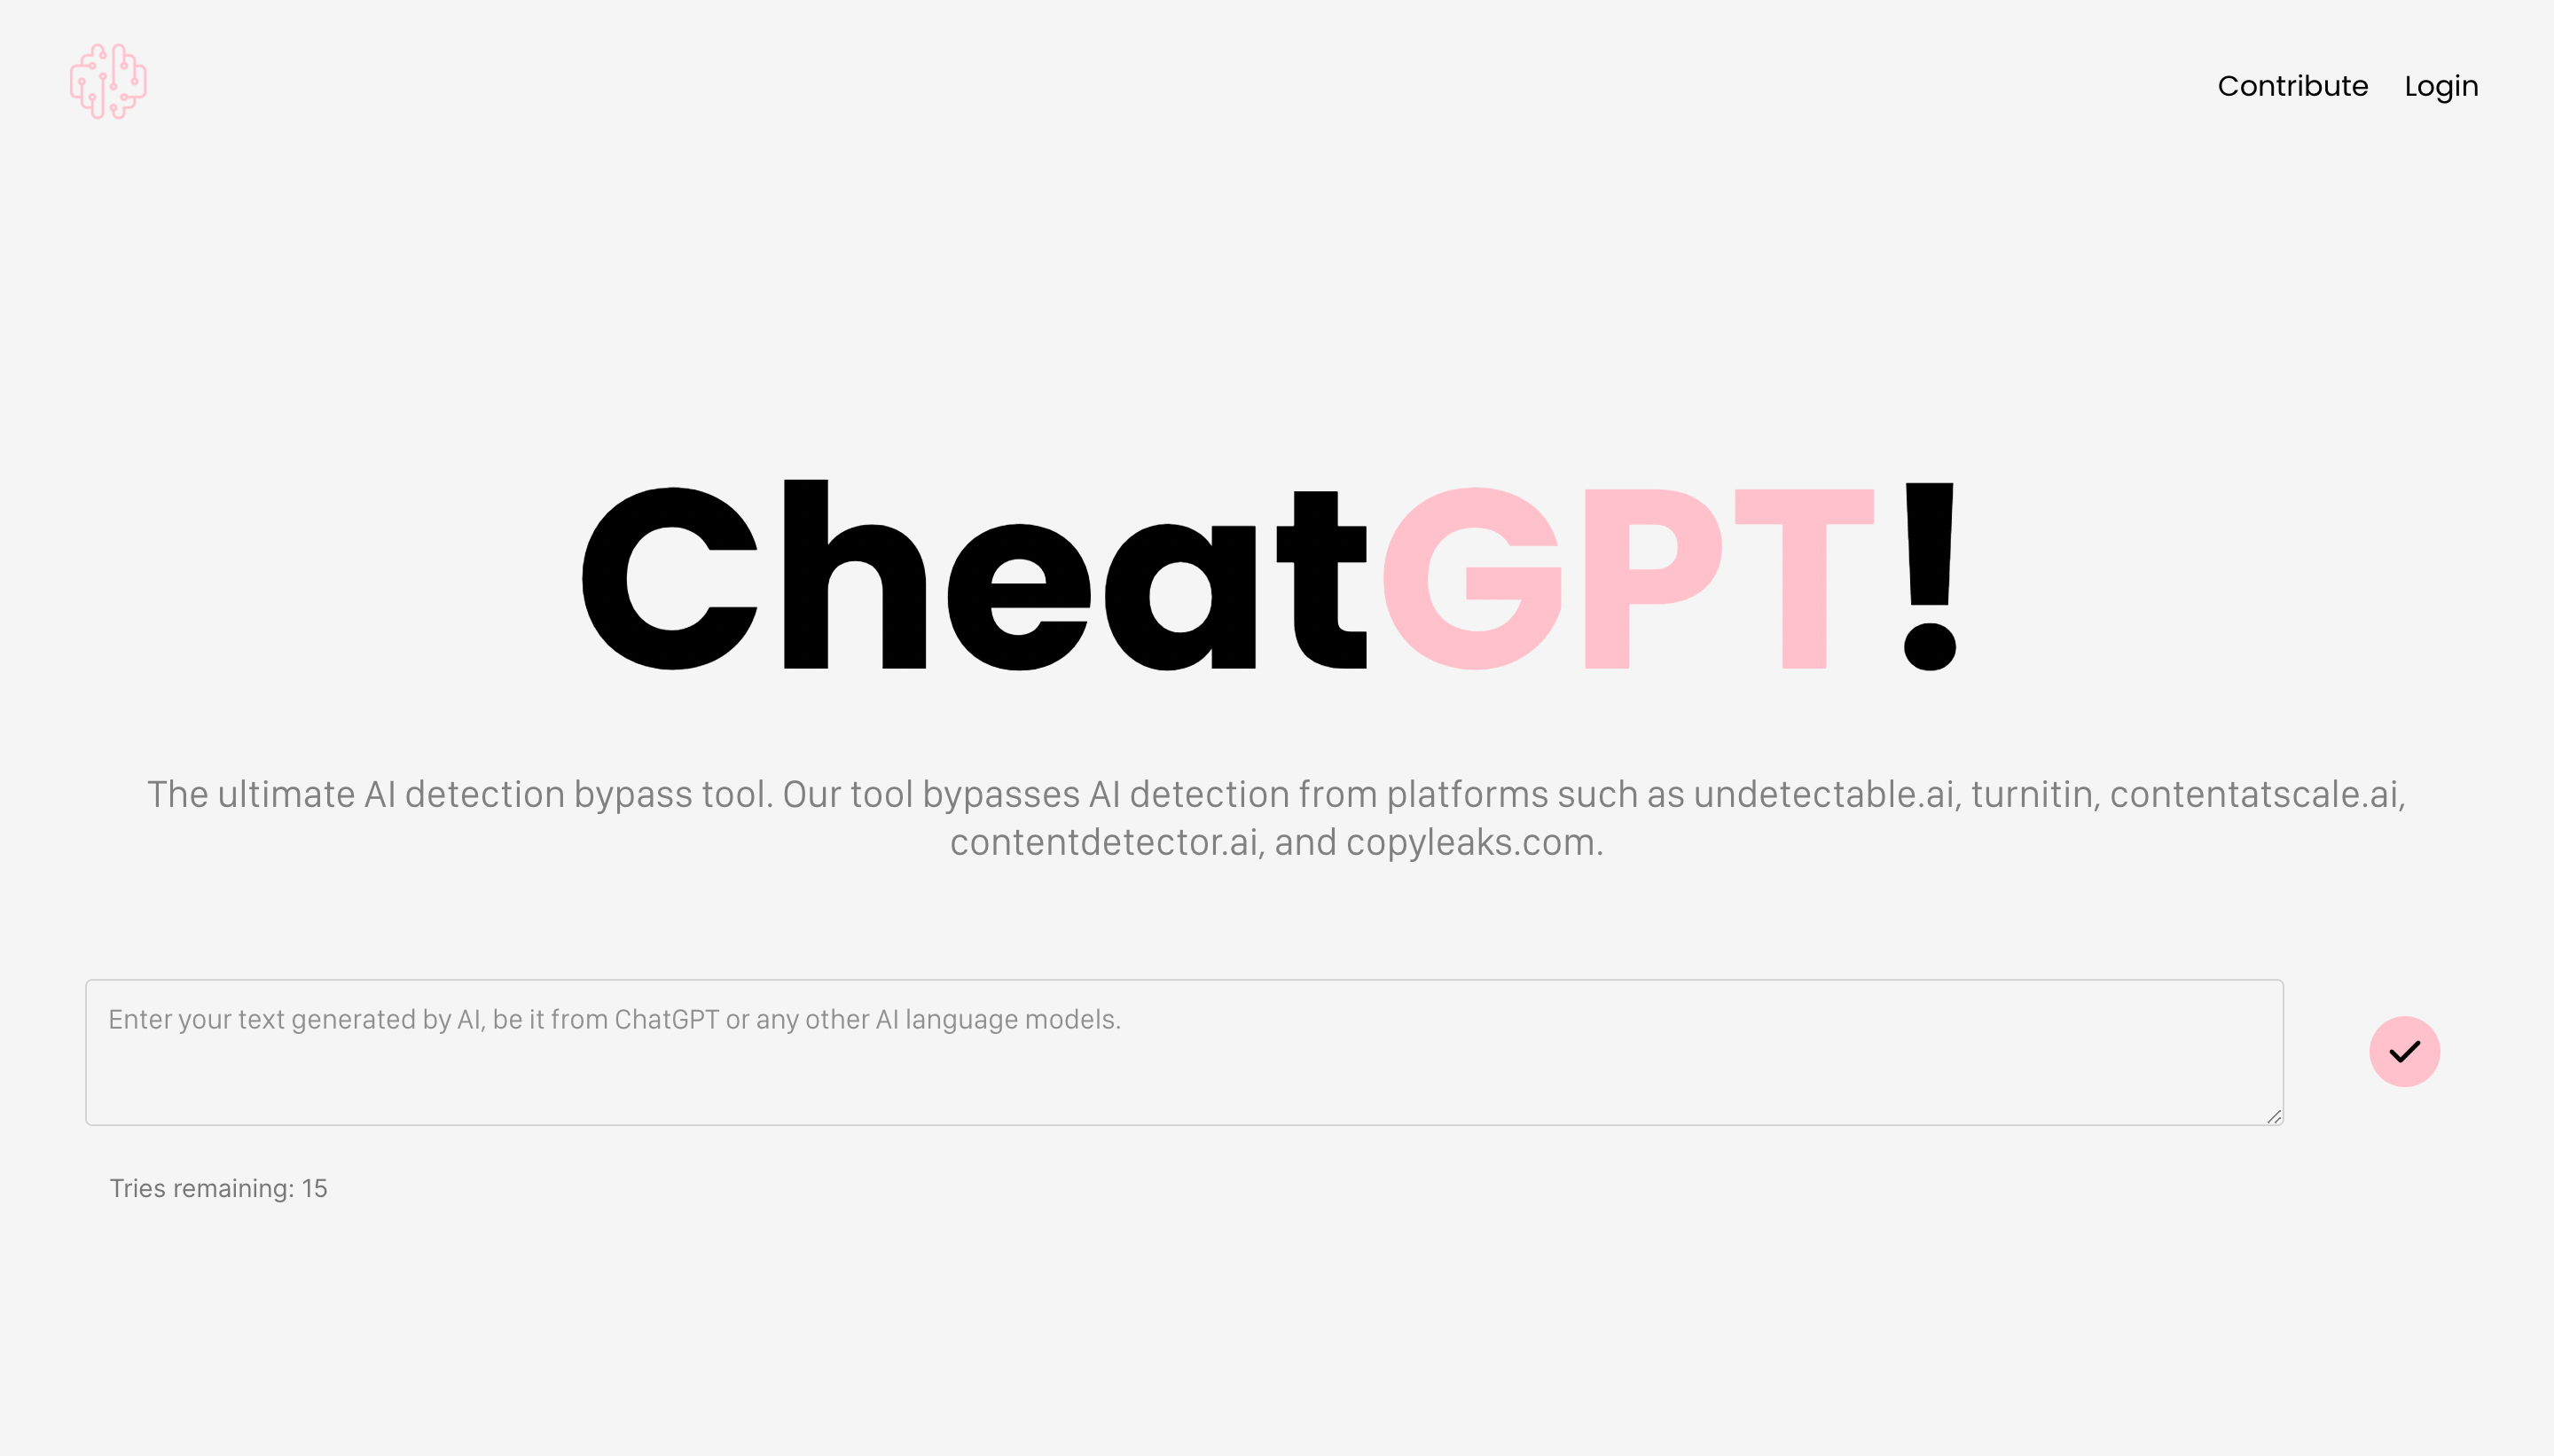 Does CheatGPT Work?